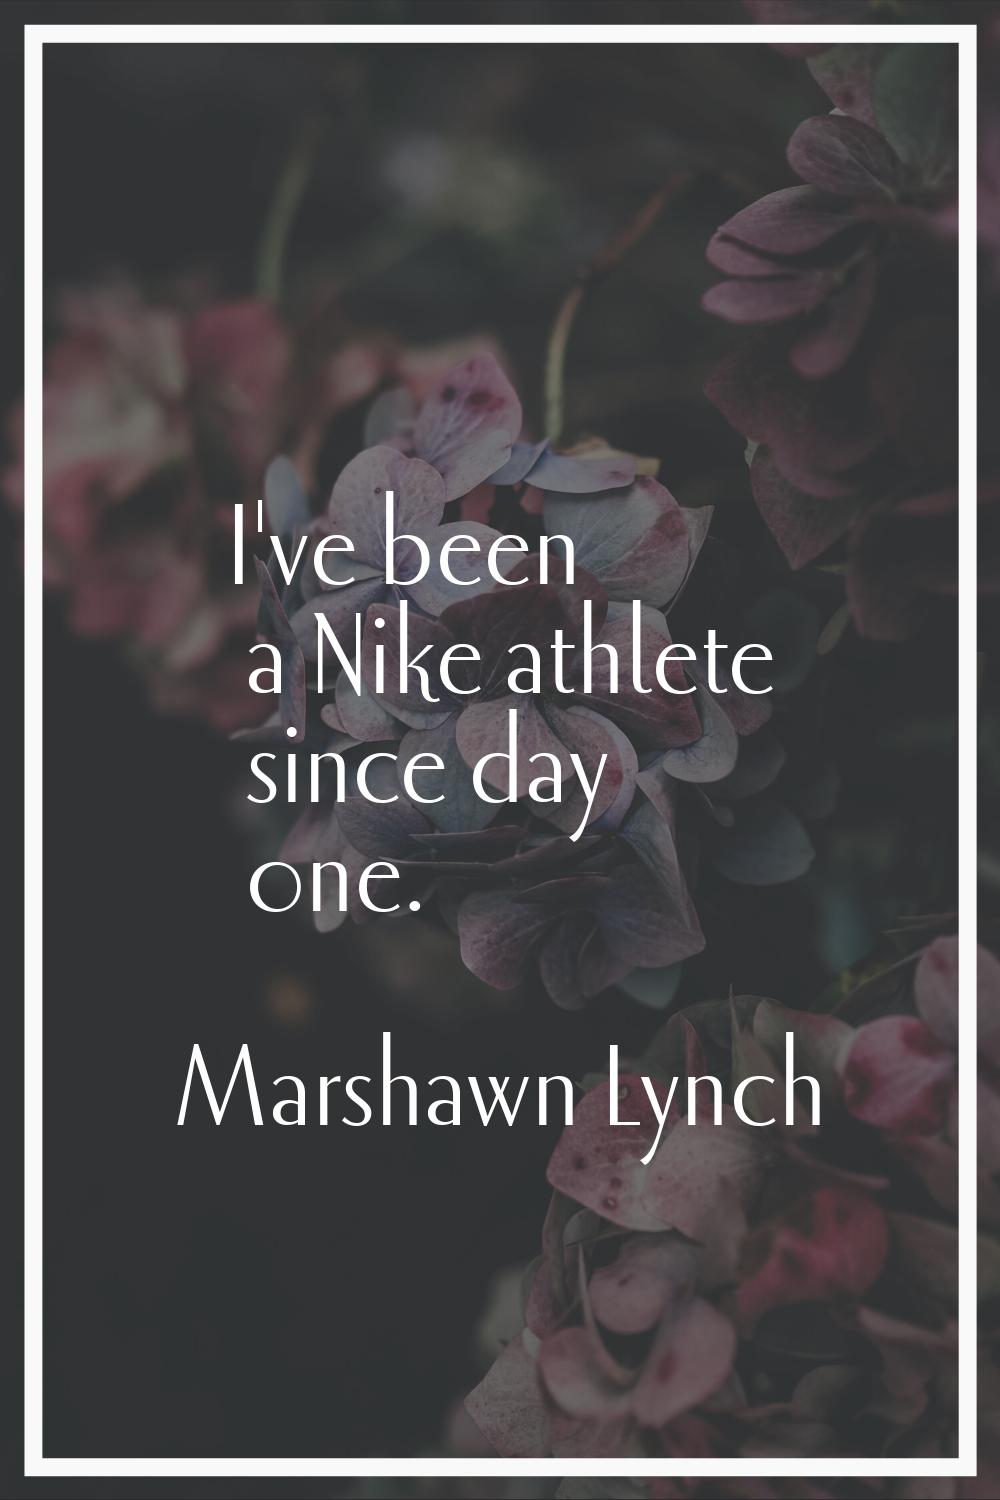 I've been a Nike athlete since day one.